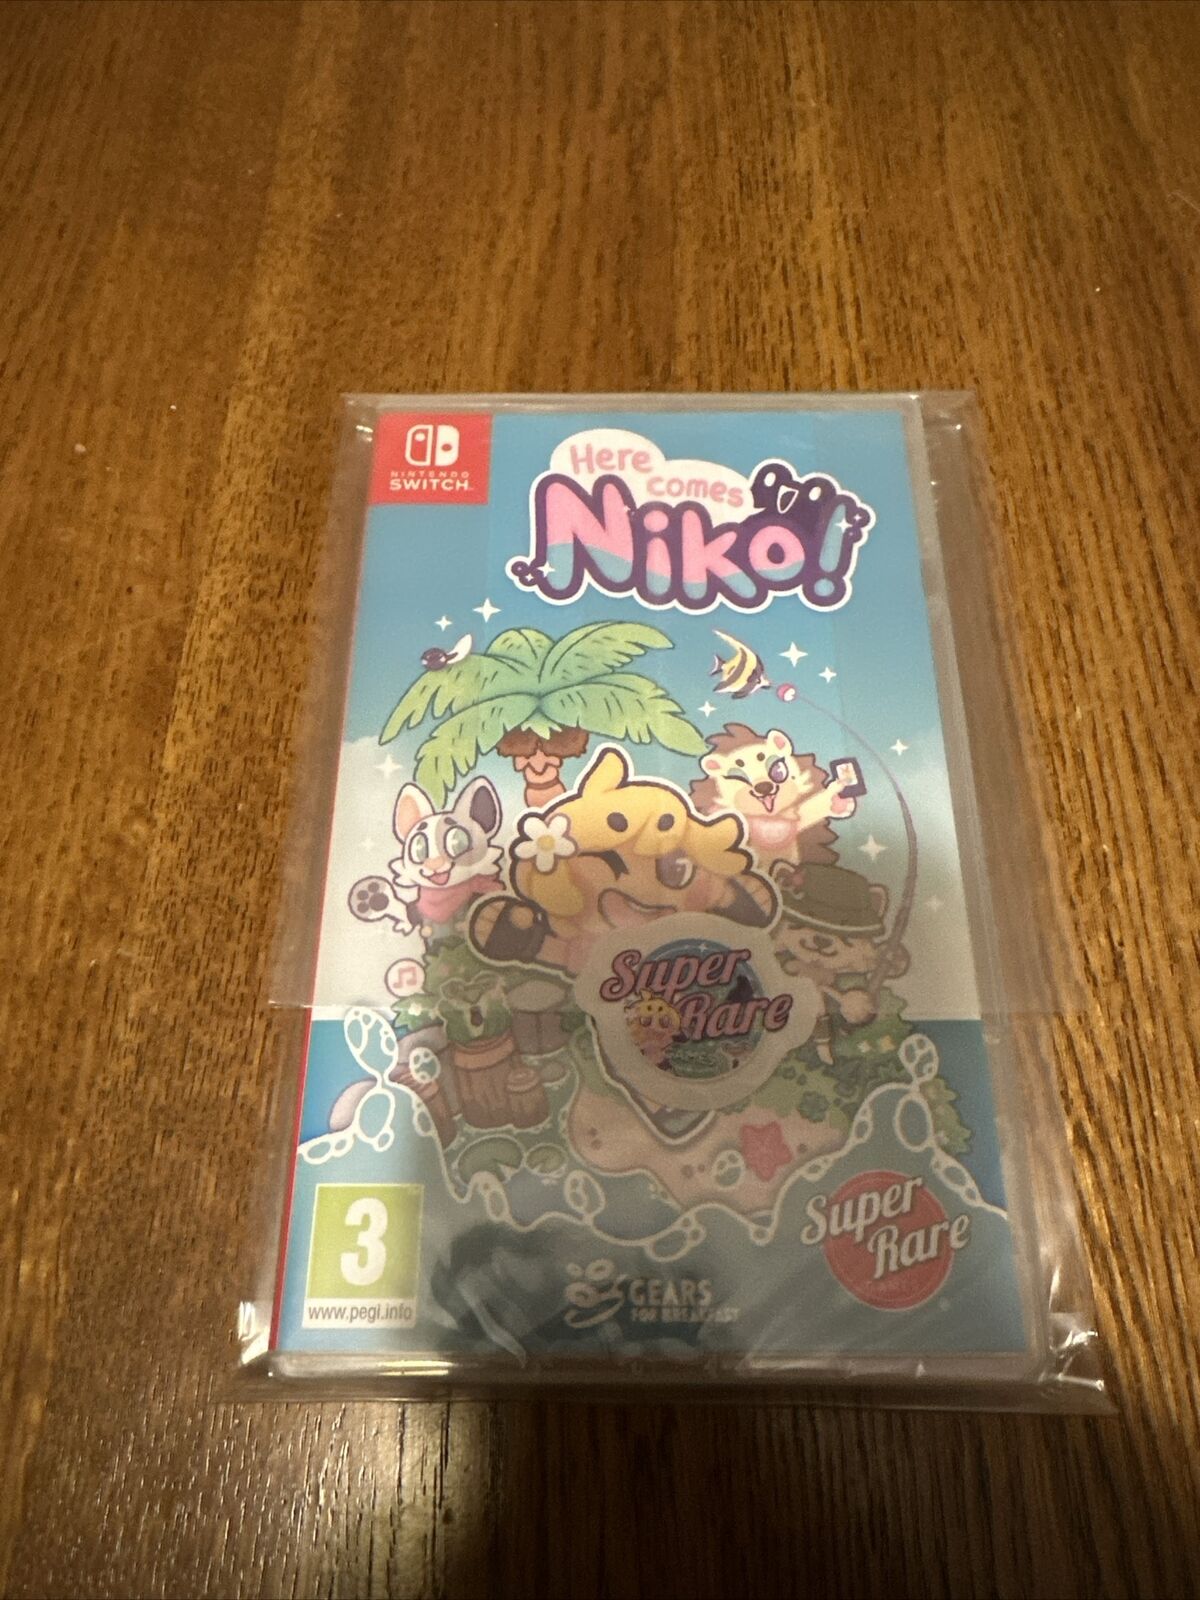 Beautiful Here Comes Niko! (Nintendo Switch) (Brand New/Sealed)- Super Rare Games #97 on eBay